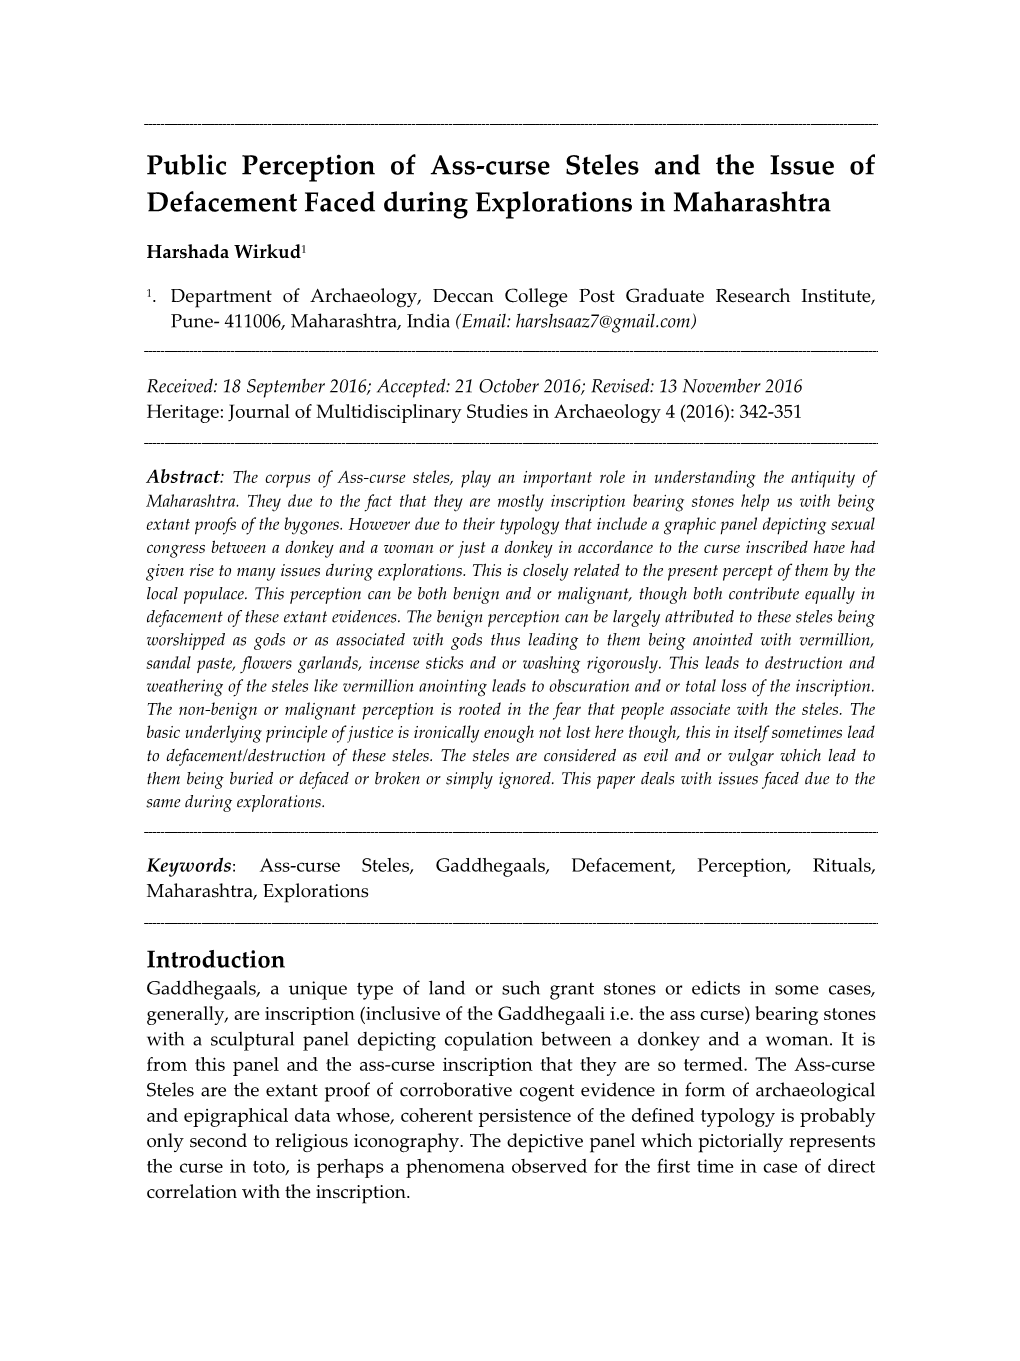 Public Perception of Ass-Curse Steles and the Issue of Defacement Faced During Explorations in Maharashtra